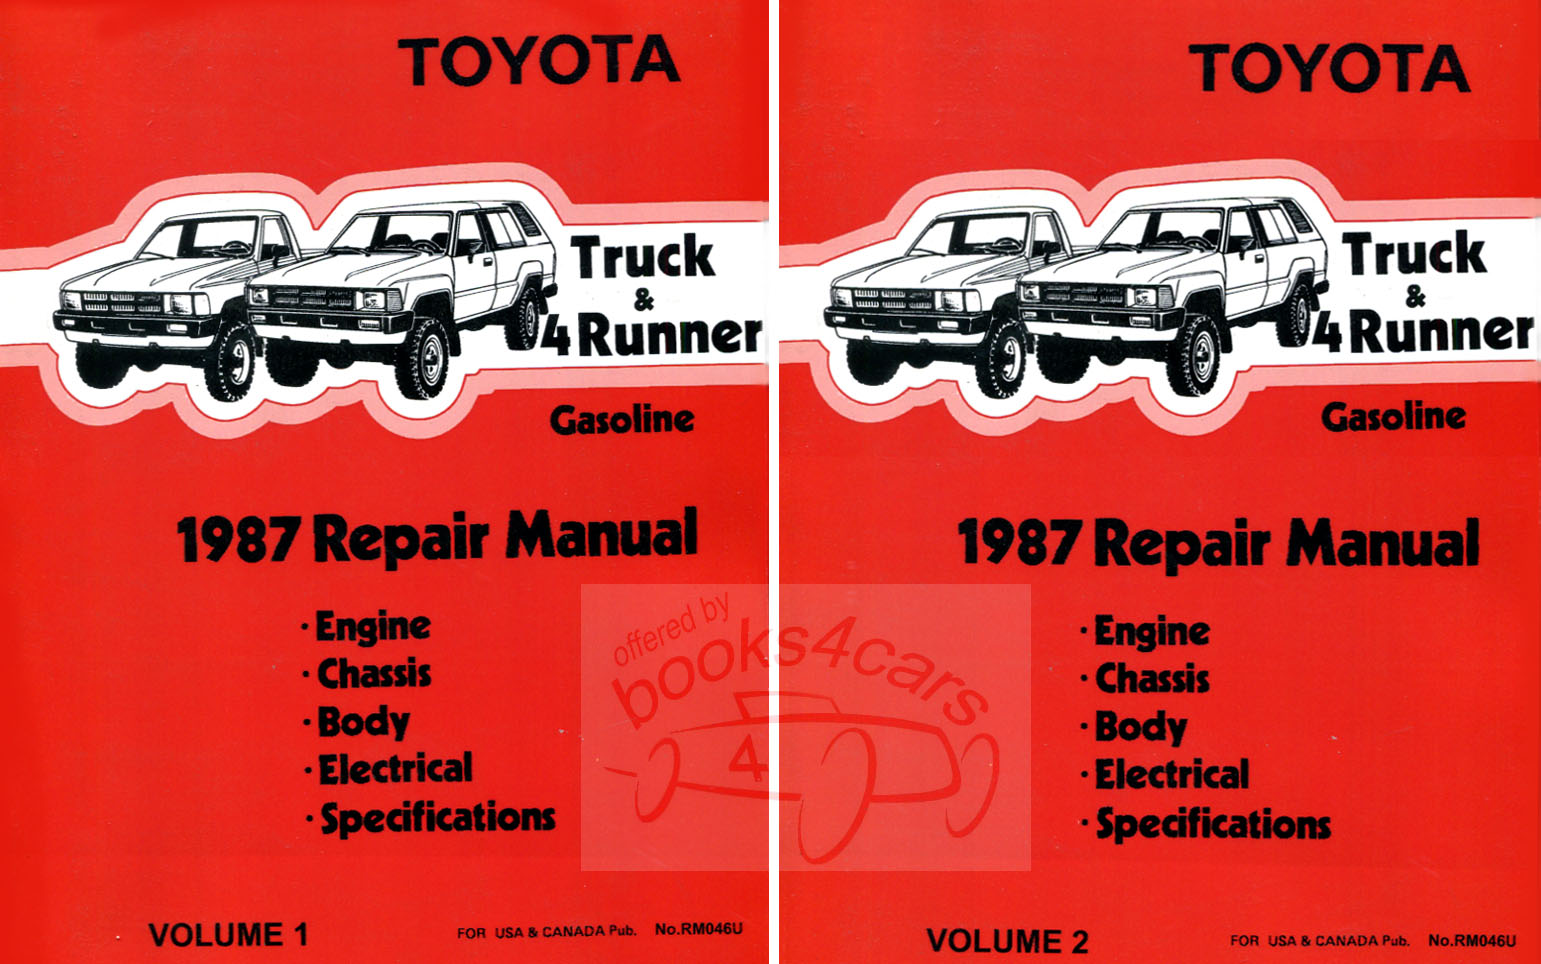 87 Truck & 4Runner Shop Service Repair Manual by Toyota includes 4x4 & Turbo 1,340 pages